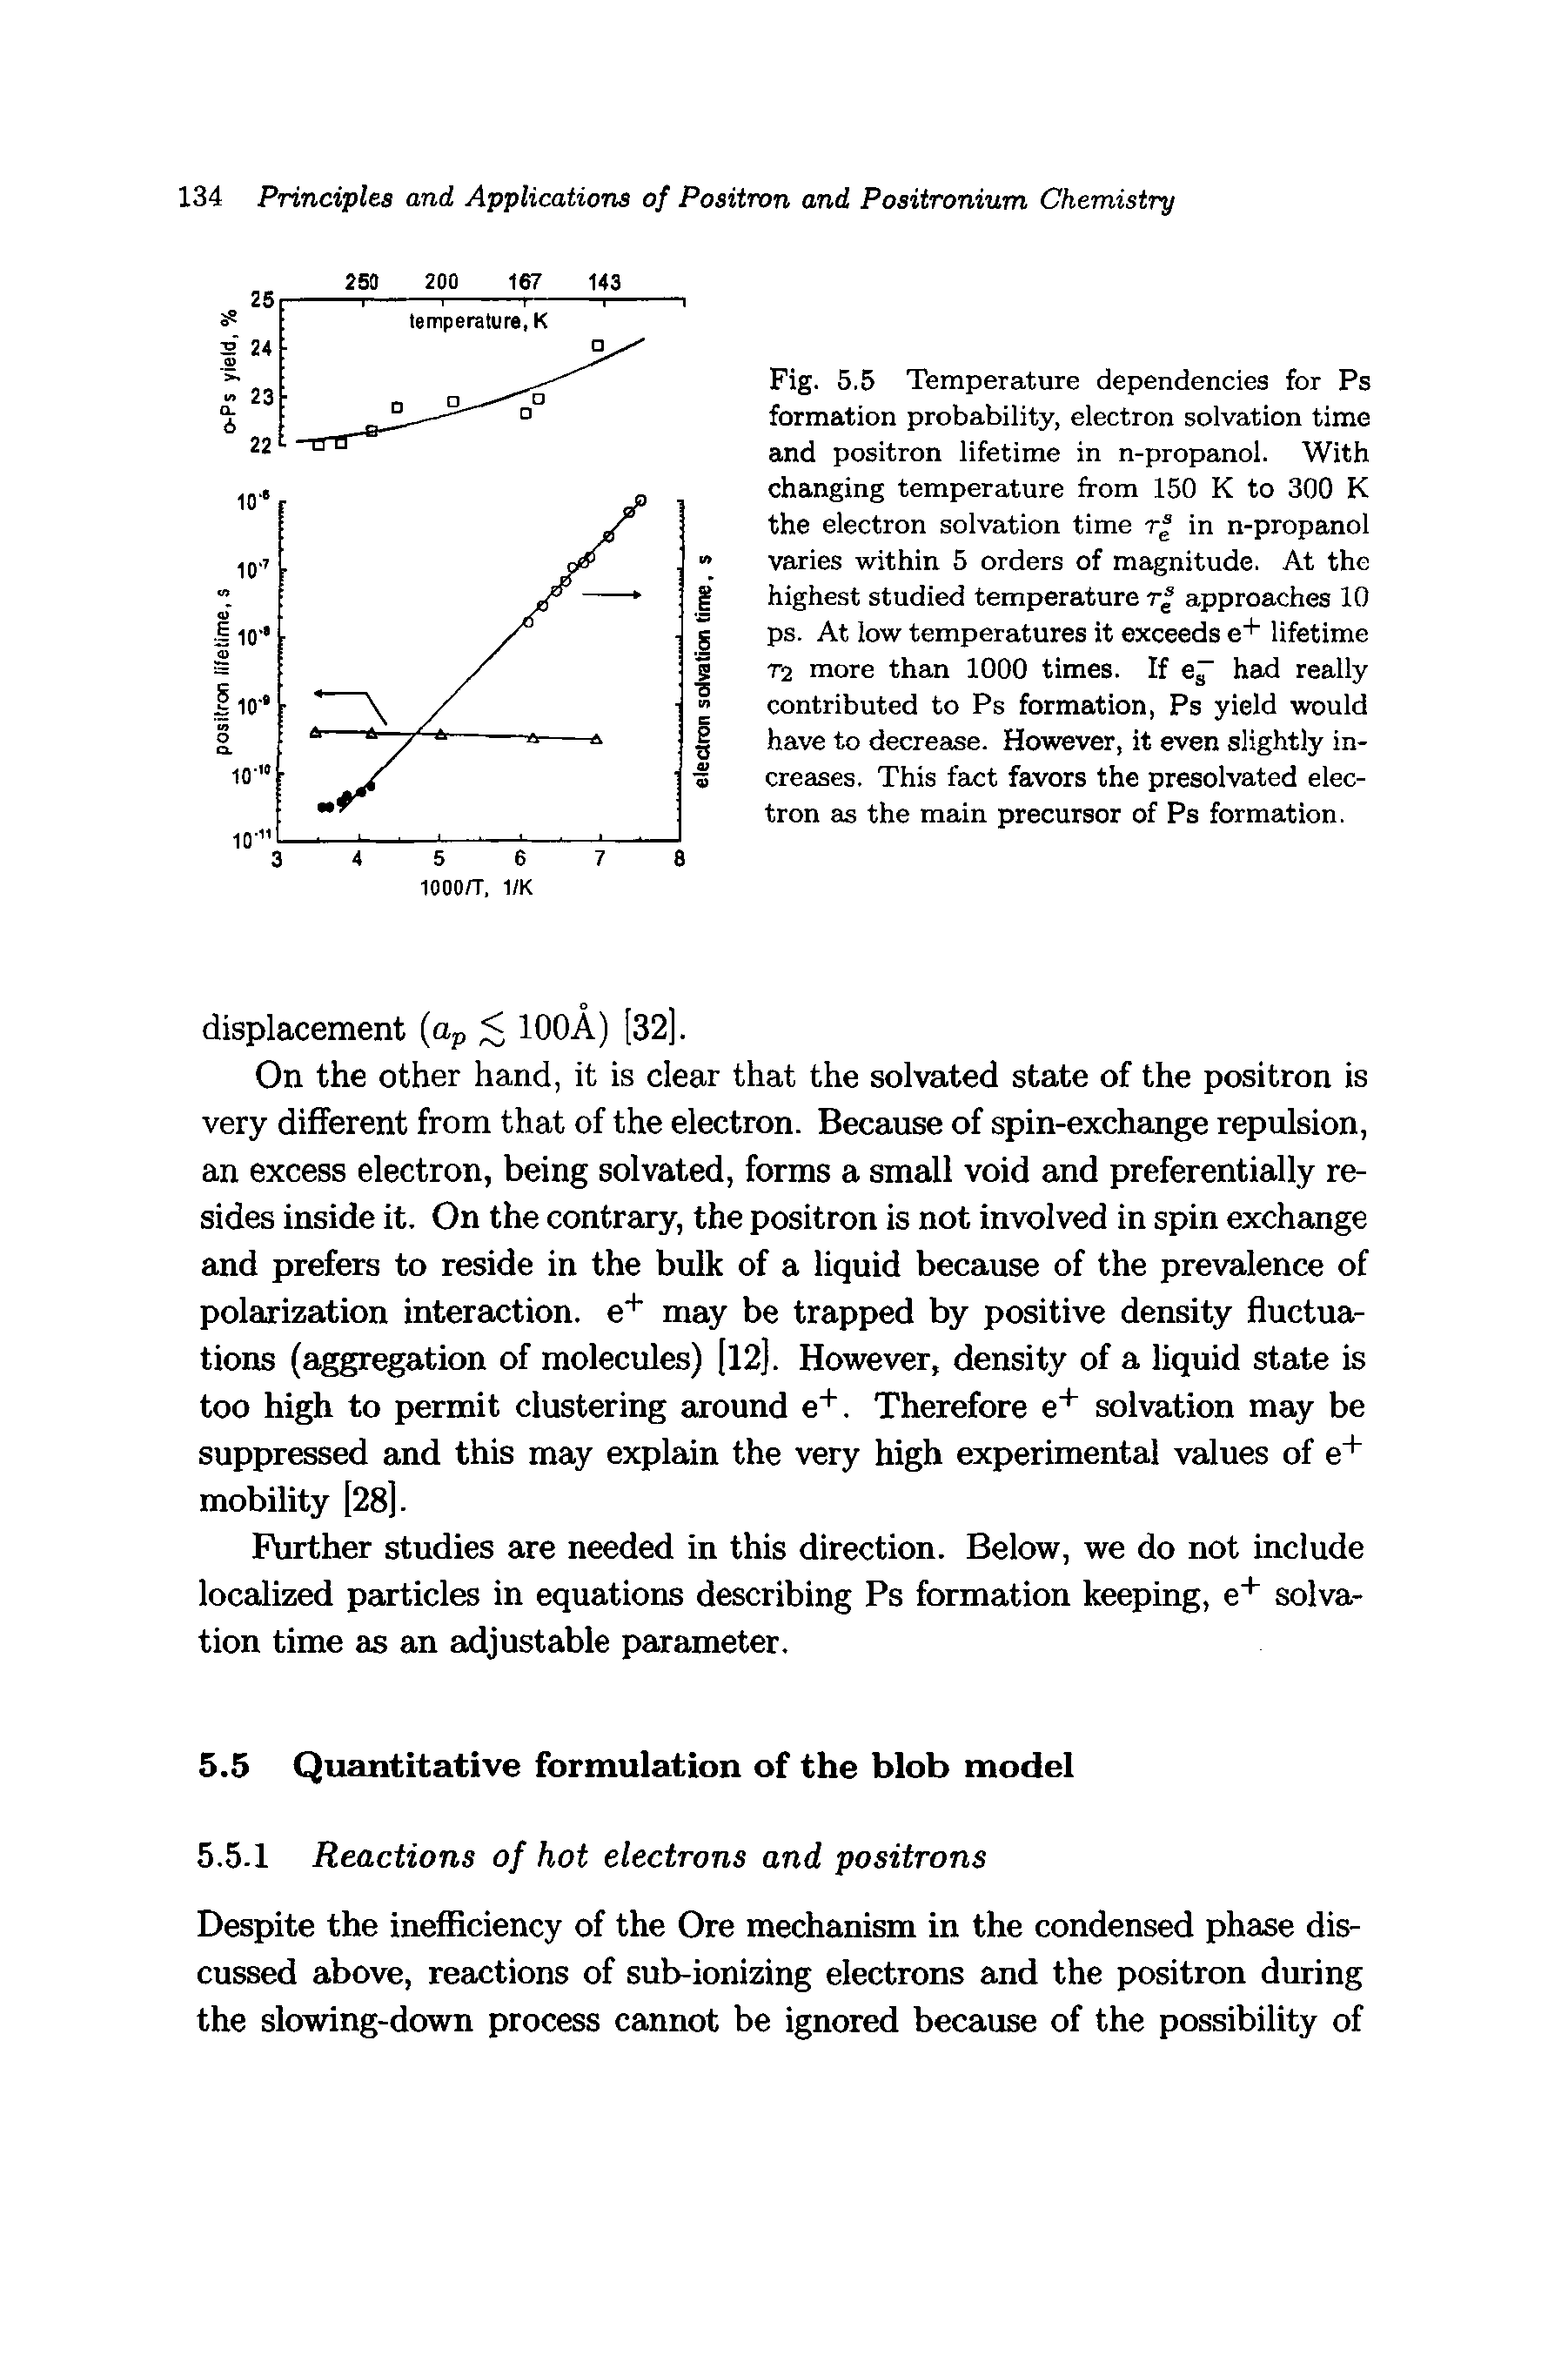 Fig. 5.5 Temperature dependencies for Ps formation probability, electron solvation time and positron lifetime in n-propanol. With changing temperature from 150 K to 300 K the electron solvation time in n-propanol varies within 5 orders of magnitude. At the highest studied temperature r approaches 10 ps. At low temperatures it exceeds e+ lifetime T2 more than 1000 times. If e had really contributed to Ps formation, Ps yield would have to decrease. However, it even slightly increases. This fact favors the presolvated electron as the main precursor of Ps formation.